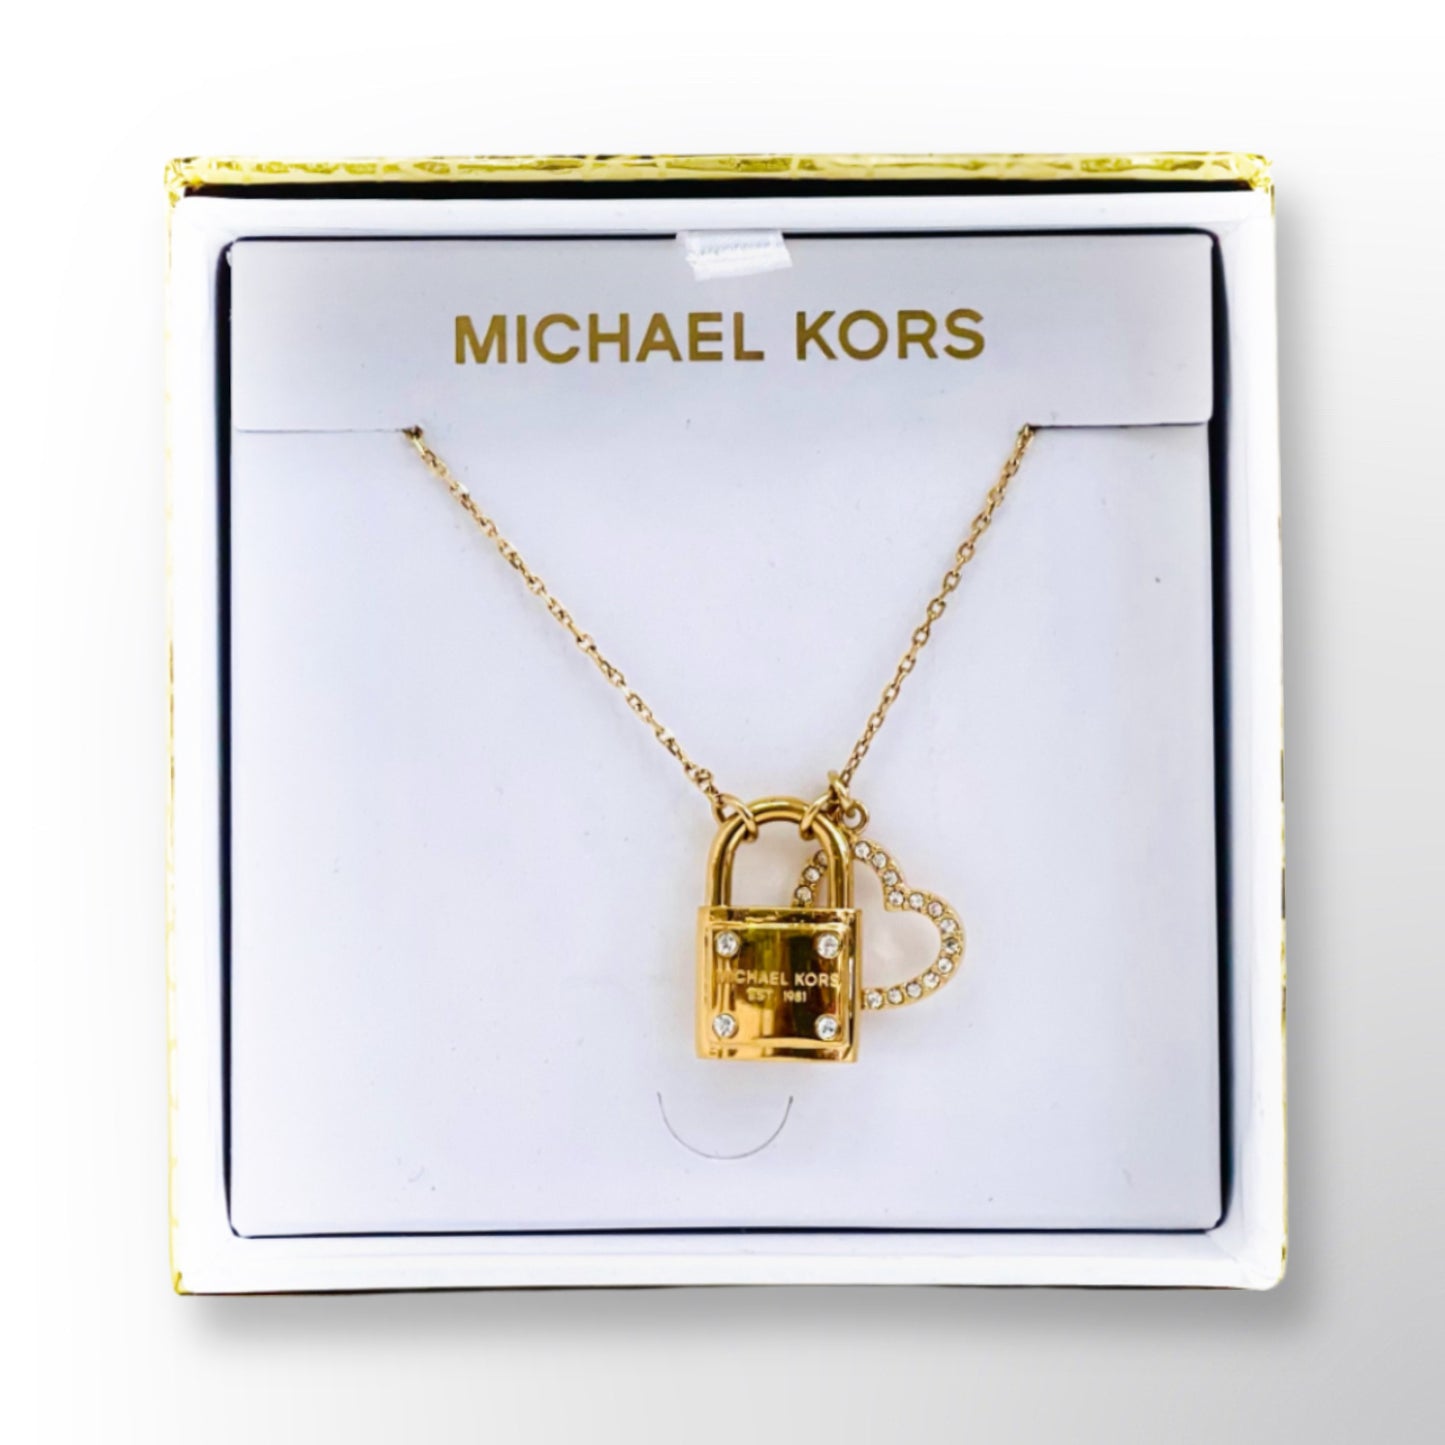 MICHAEL KORS GOLD ROUND NECKLACE